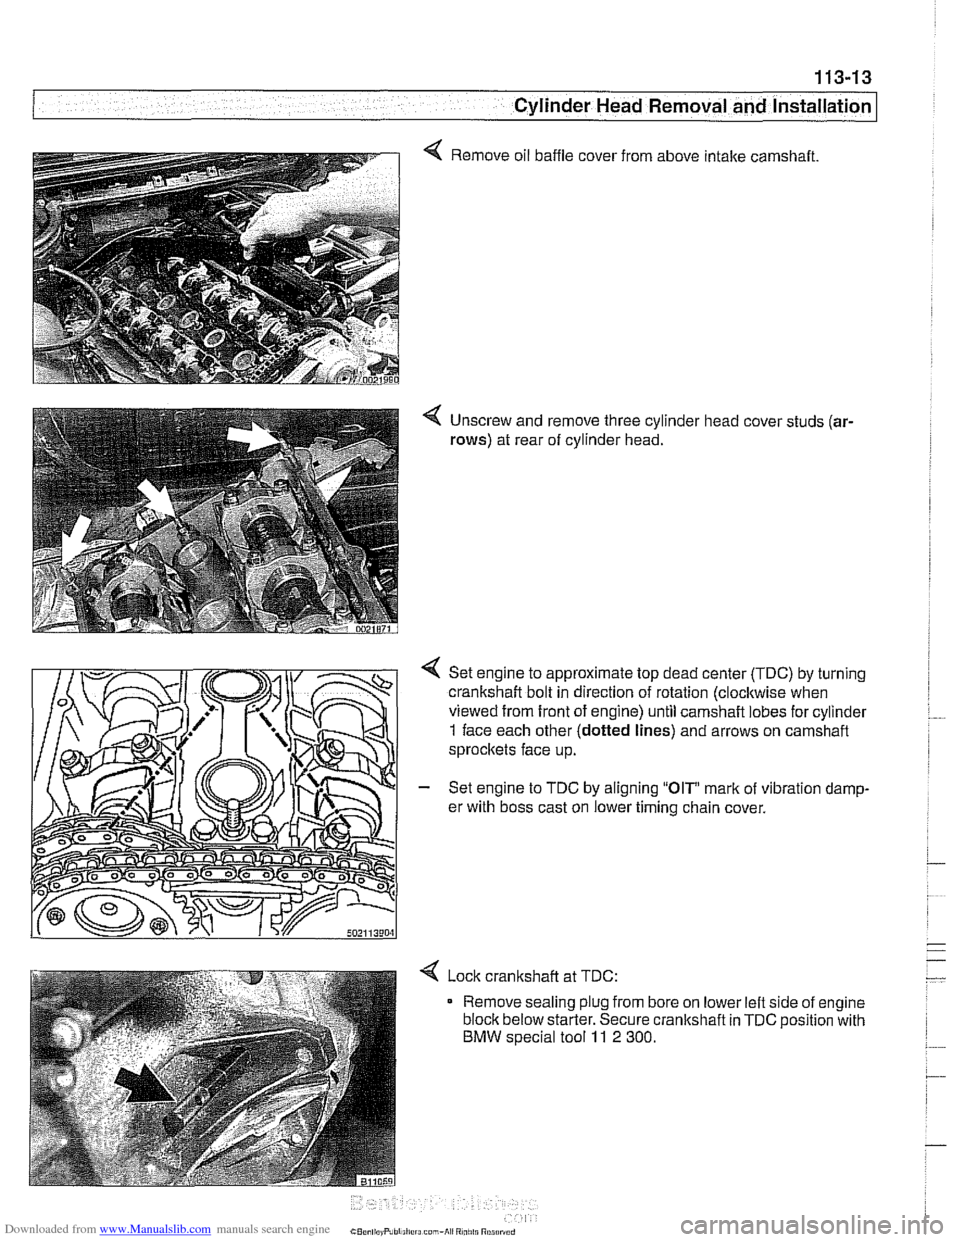 BMW 528i 2000 E39 Workshop Manual Downloaded from www.Manualslib.com manuals search engine 
- - , -. I Cylinder Head Removal and lnstallatio~ 
4 Remove oil baffle  cover from  above intake camshaft. 
4 Unscrew  and remove  three cylin